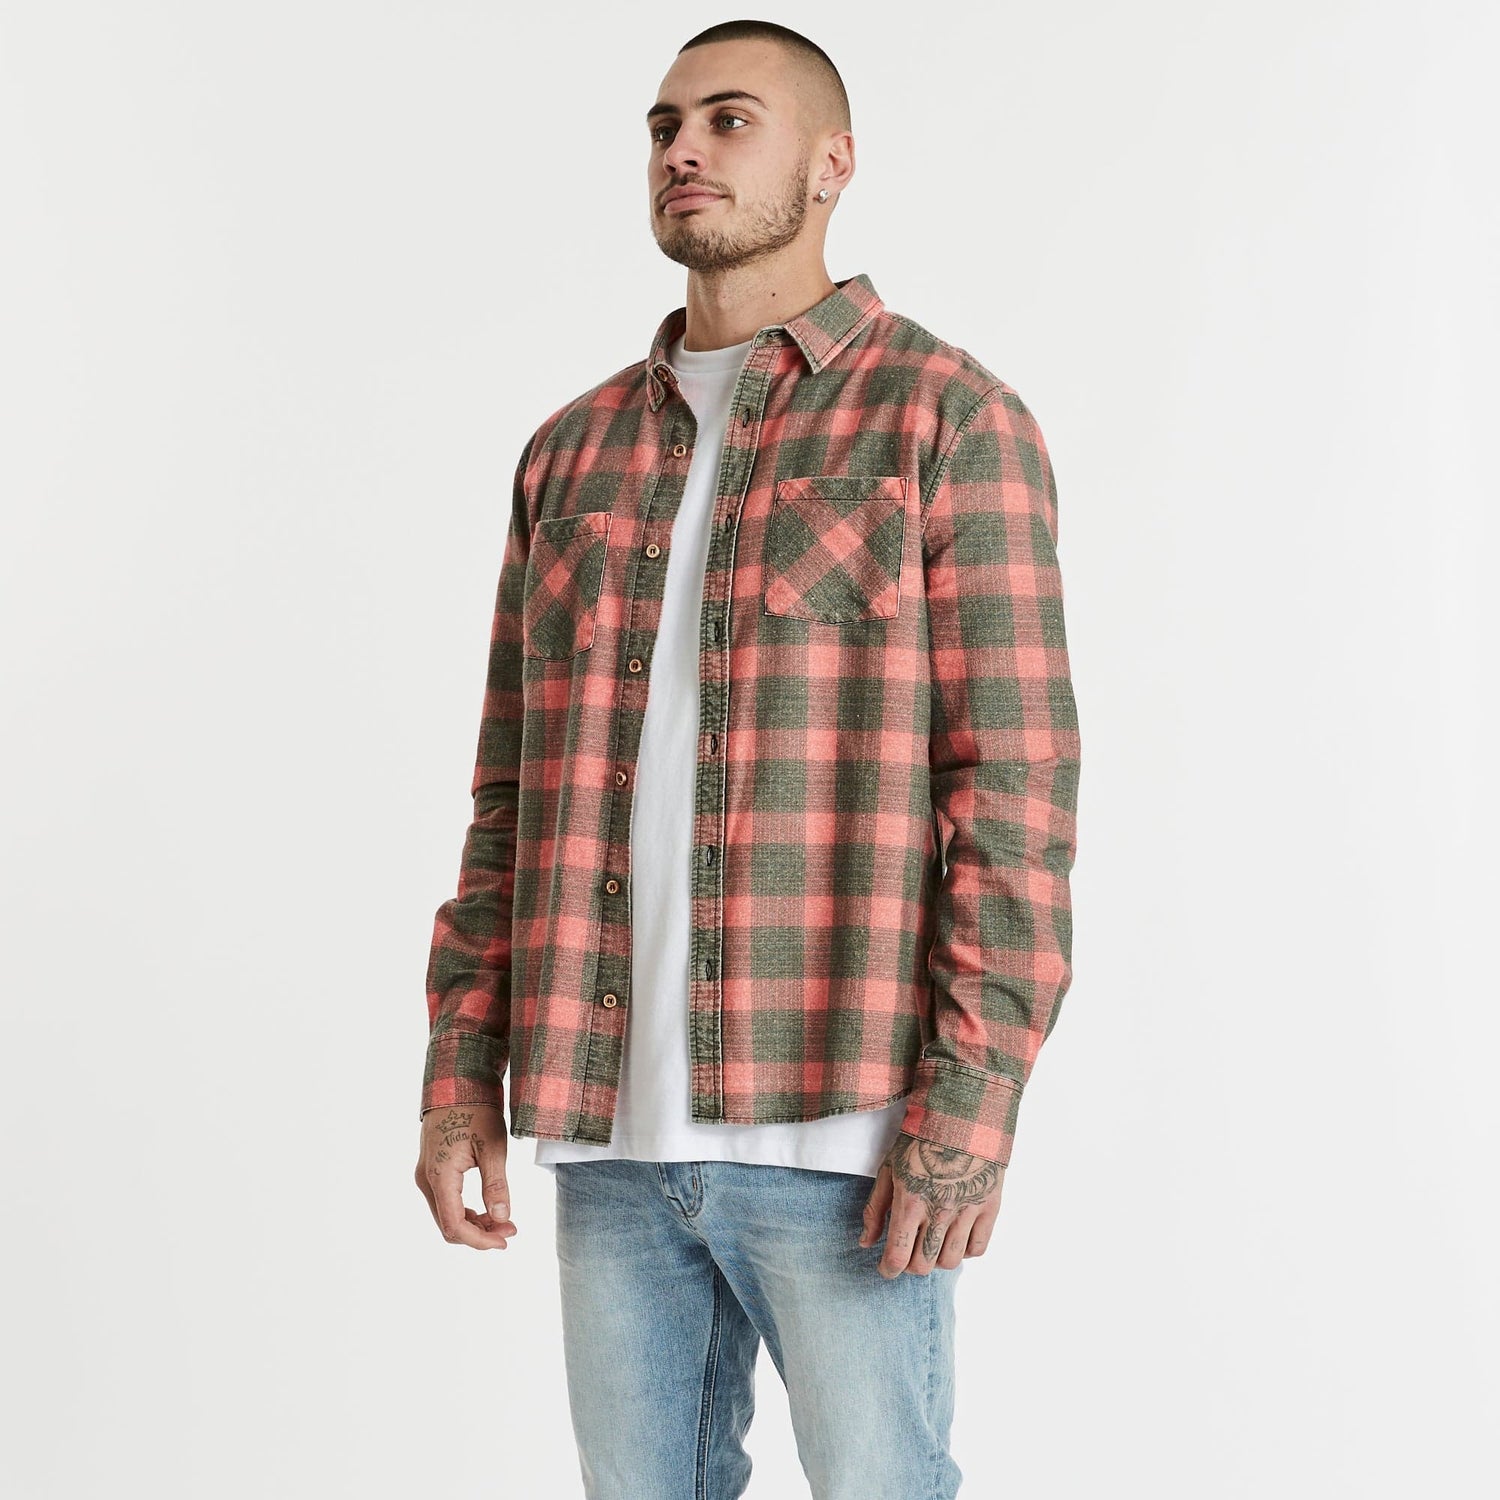 Charge Casual Long Sleeve Shirt Black/Red Check